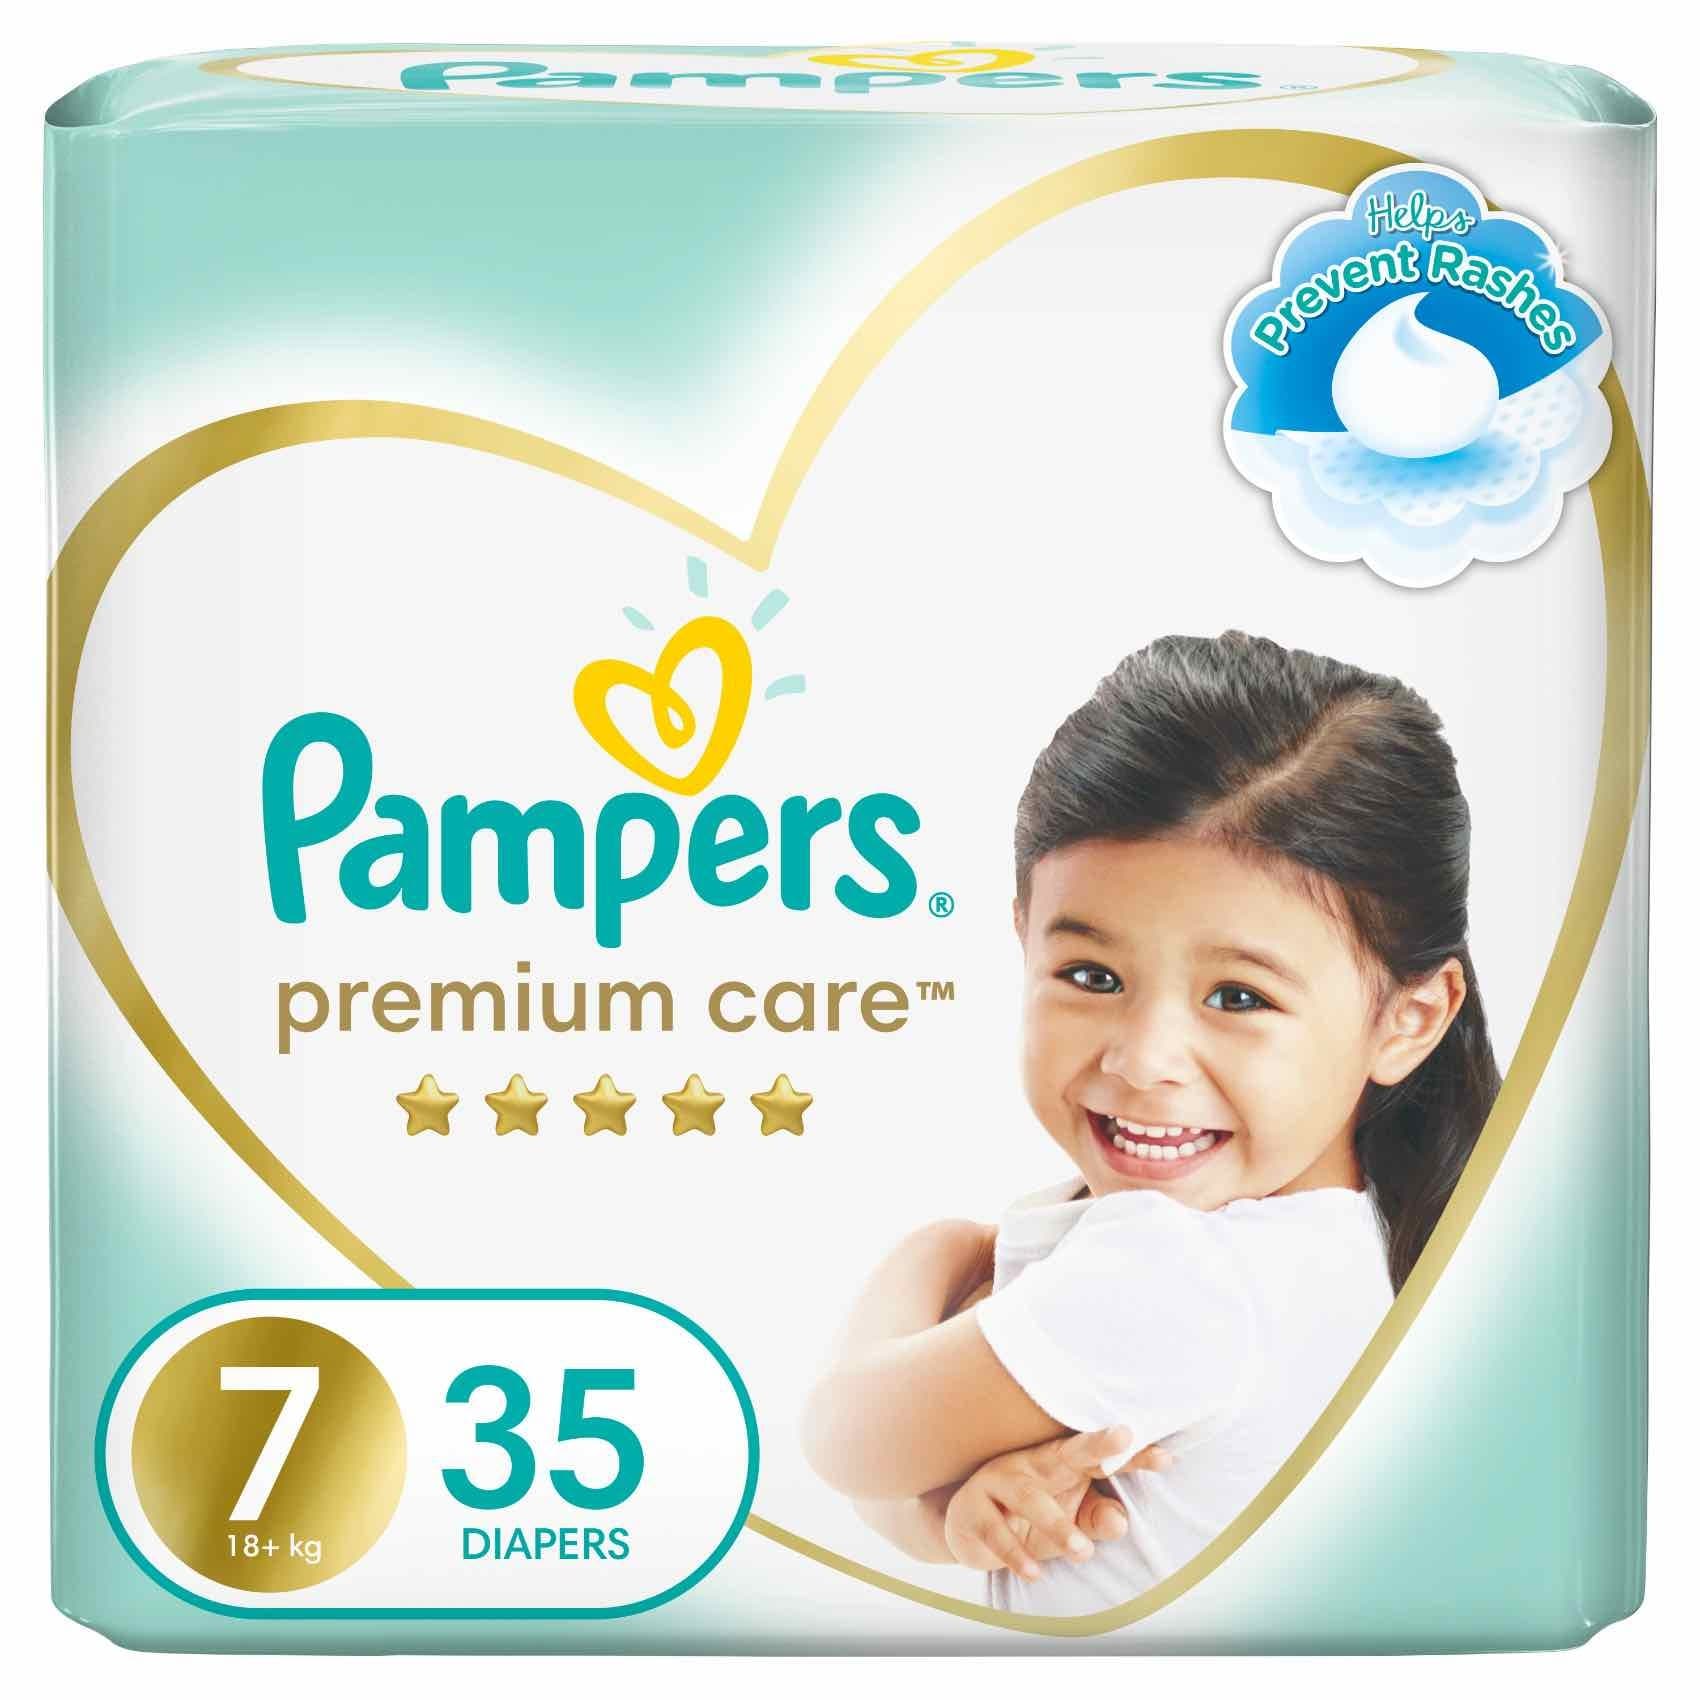 Buy Pampers Premium Care Taped Baby Diapers Size 7 (18+ kg) 35 Diapers  Online - Shop Baby Products on Carrefour UAE